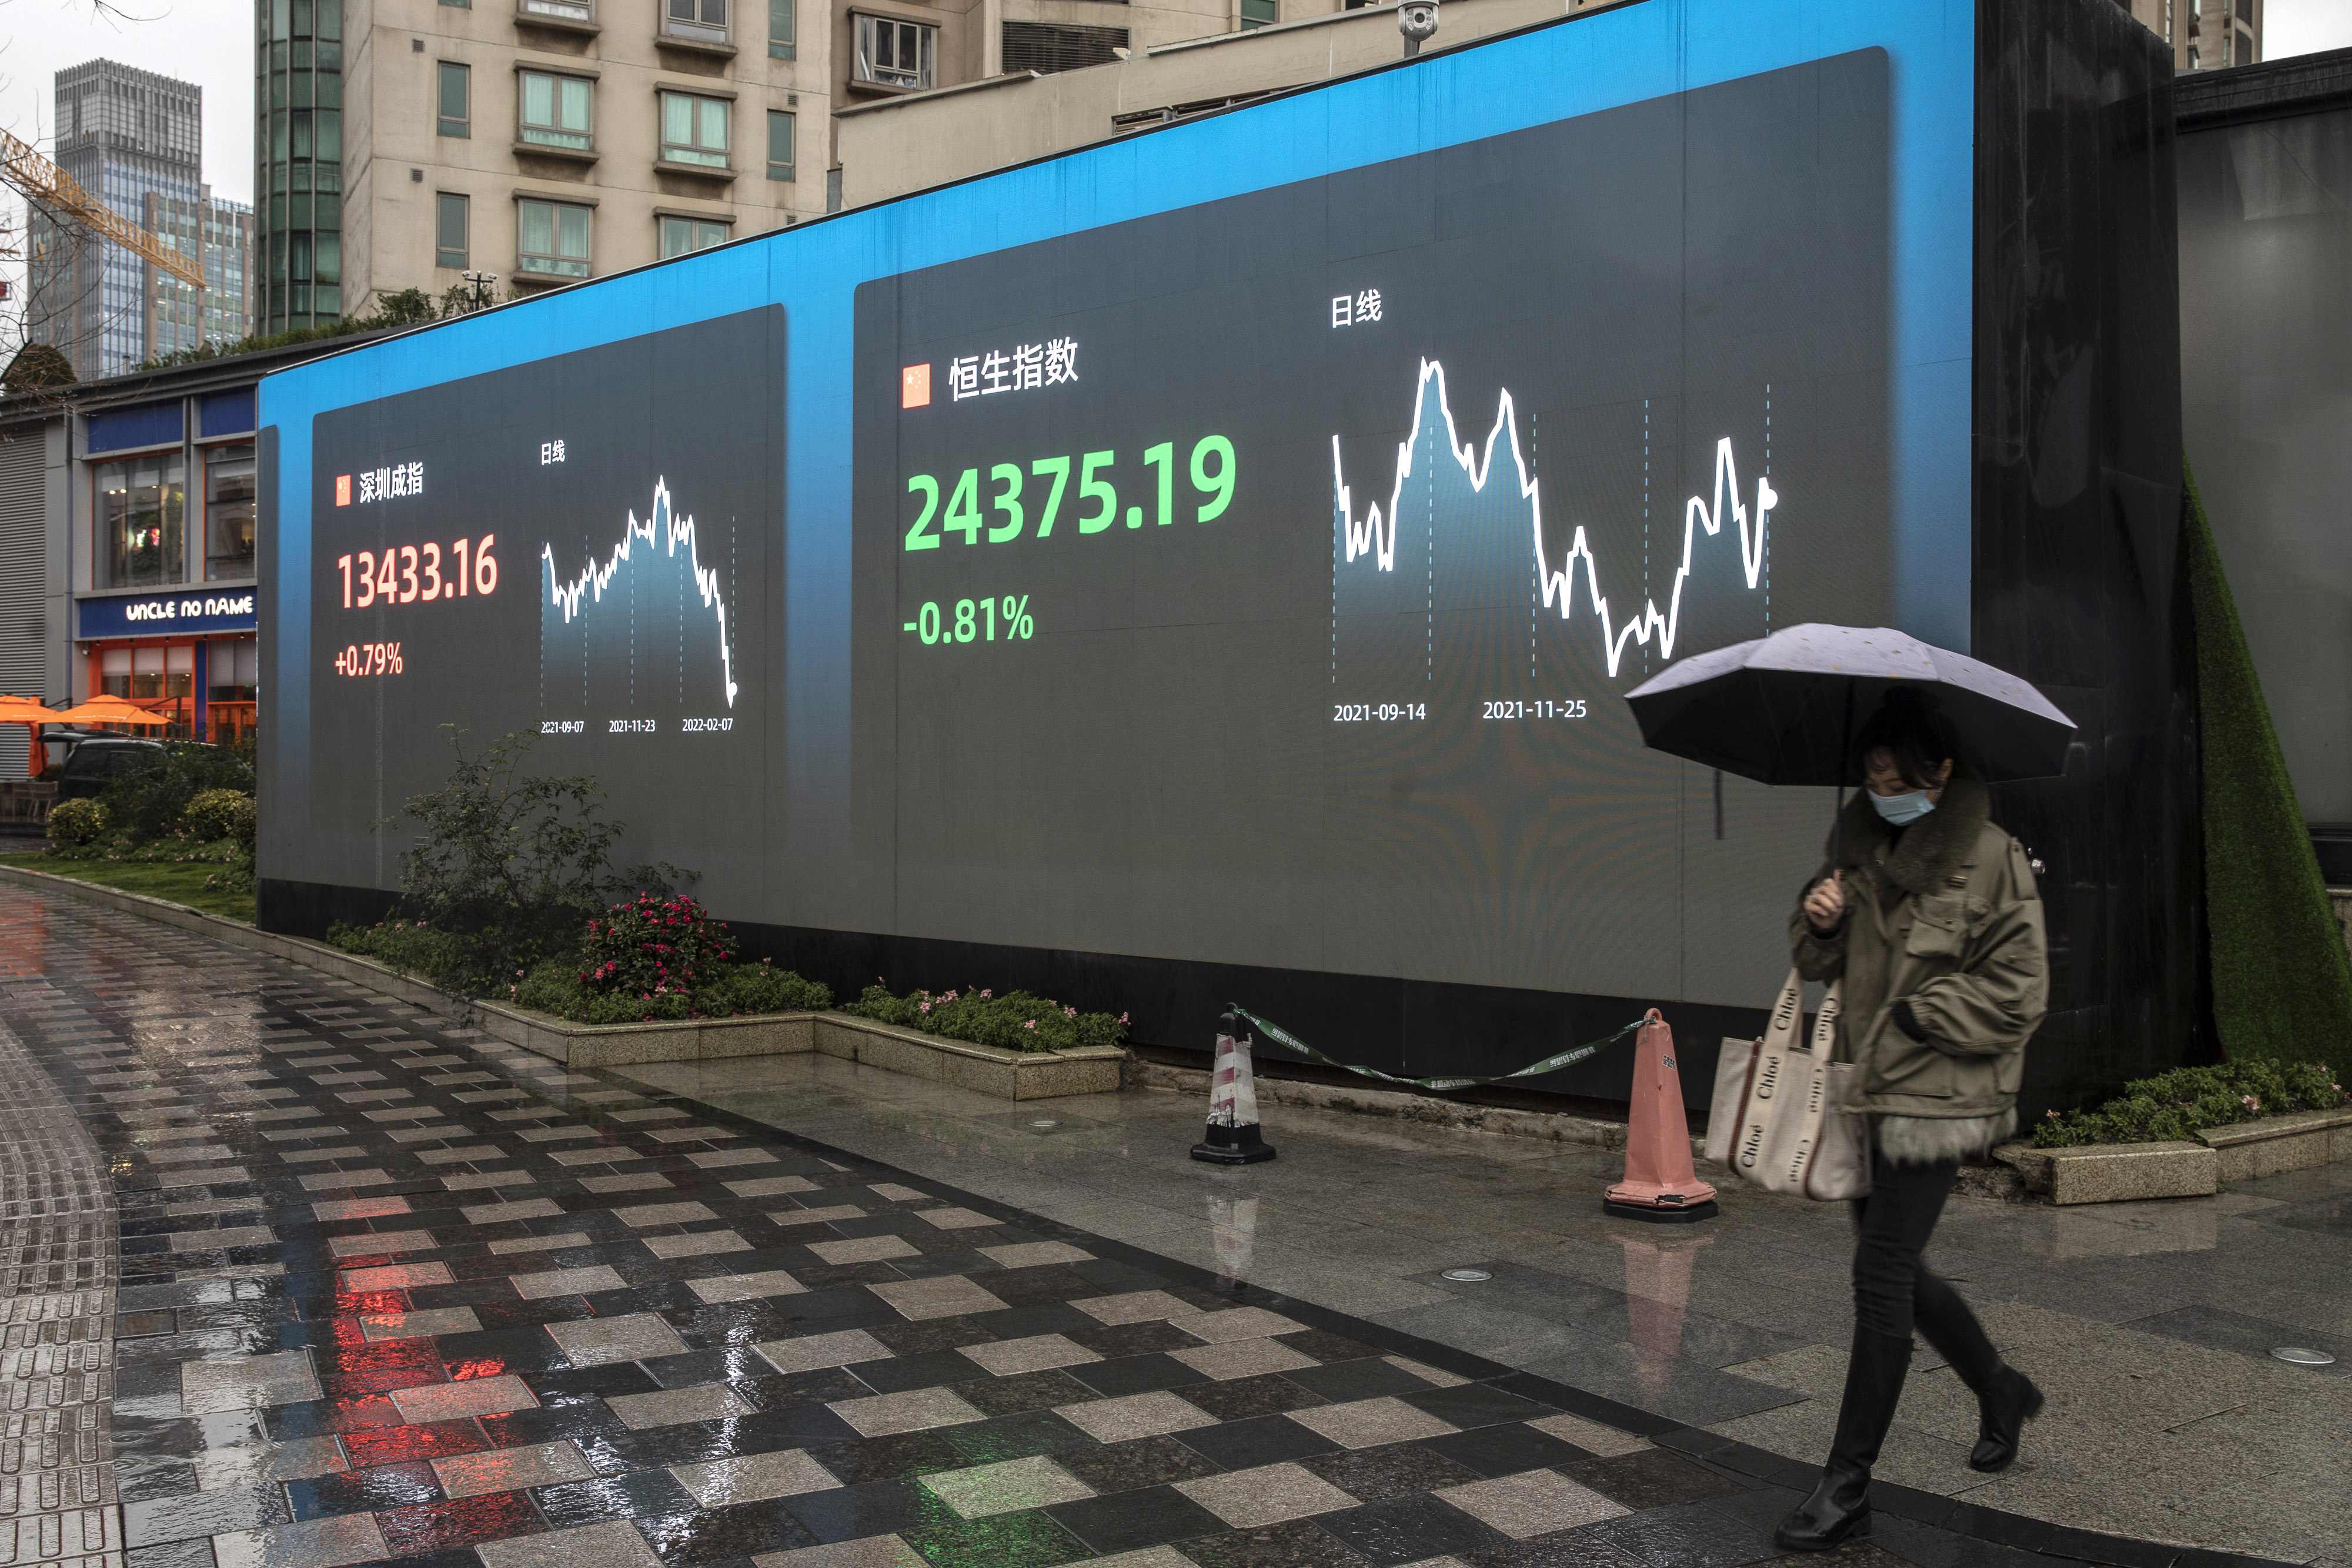 A public screen displays the Shenzhen Stock Exchange and the Hang Seng Index figures in Shanghai on February 7. There are early signs that earnings among emerging market companies are beginning to stabilise after a prolonged period of weakness – just as the earnings picture in developed markets is beginning to look less stellar. Photo: Bloomberg